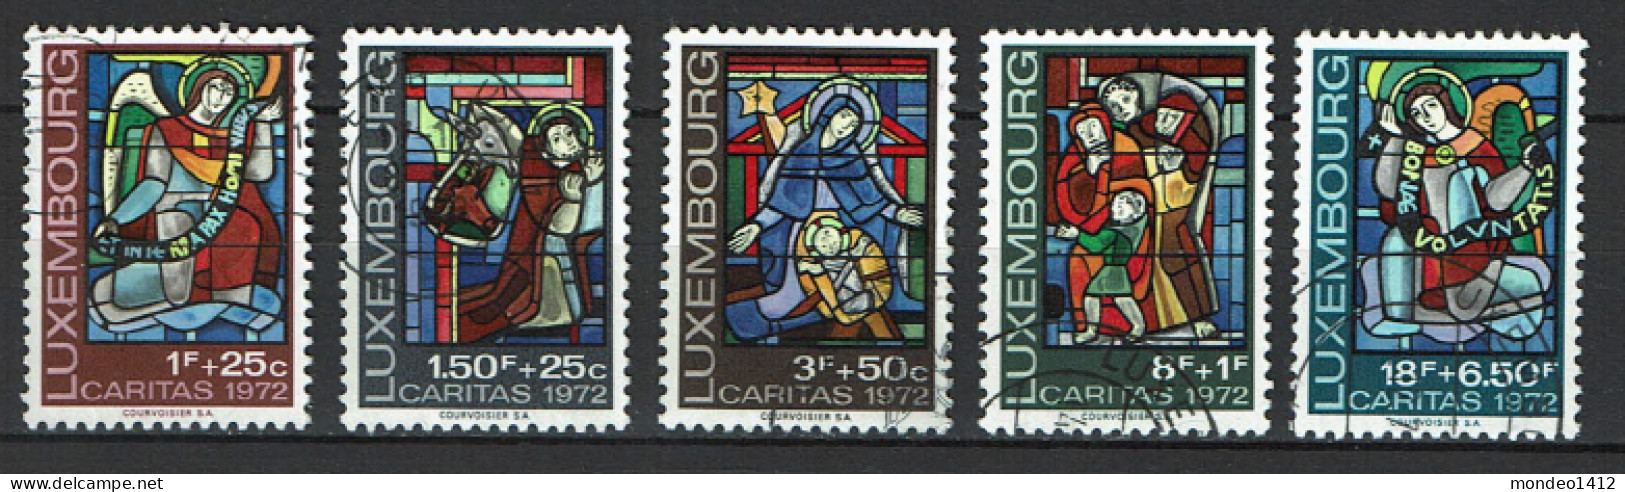 Luxembourg 1972 - YT 803/807 - Nativity - Charity Issue, Vitraux De La Cathédrale De Luxembourg - Used Stamps